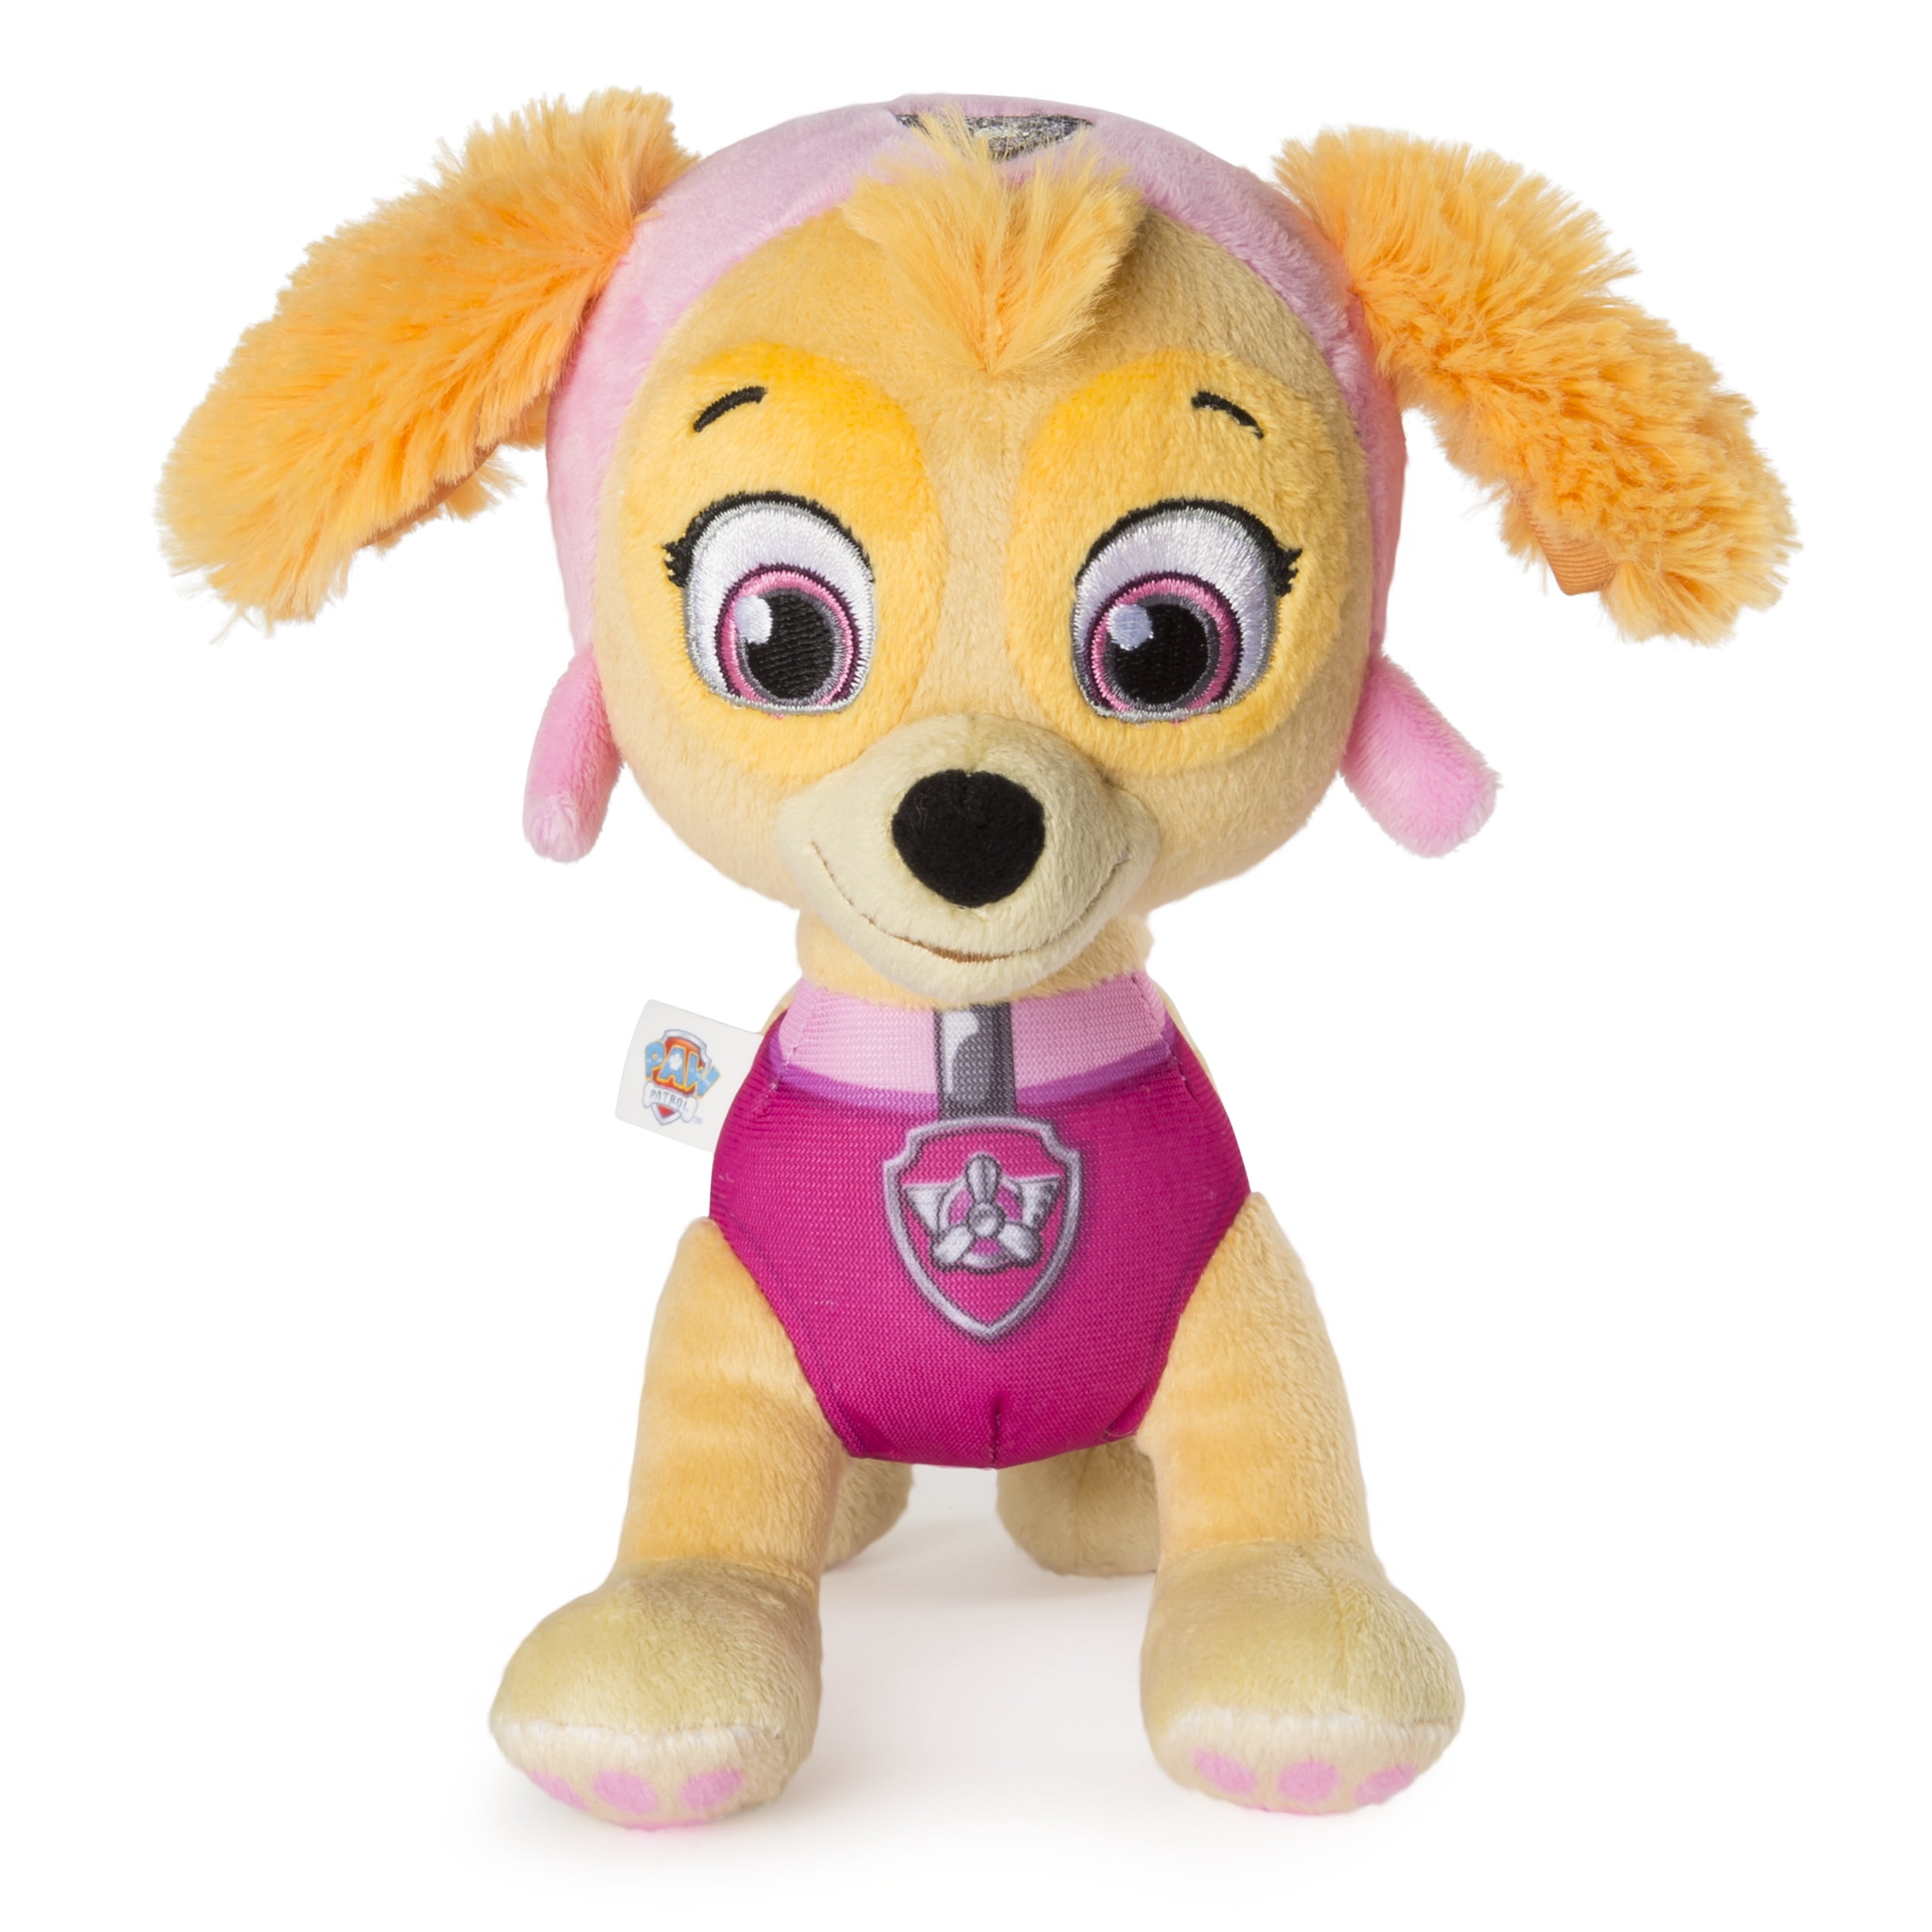 Standing Plush with Stitched Detailing 8” Skye Plush Toy Paw Patrol for Ages 